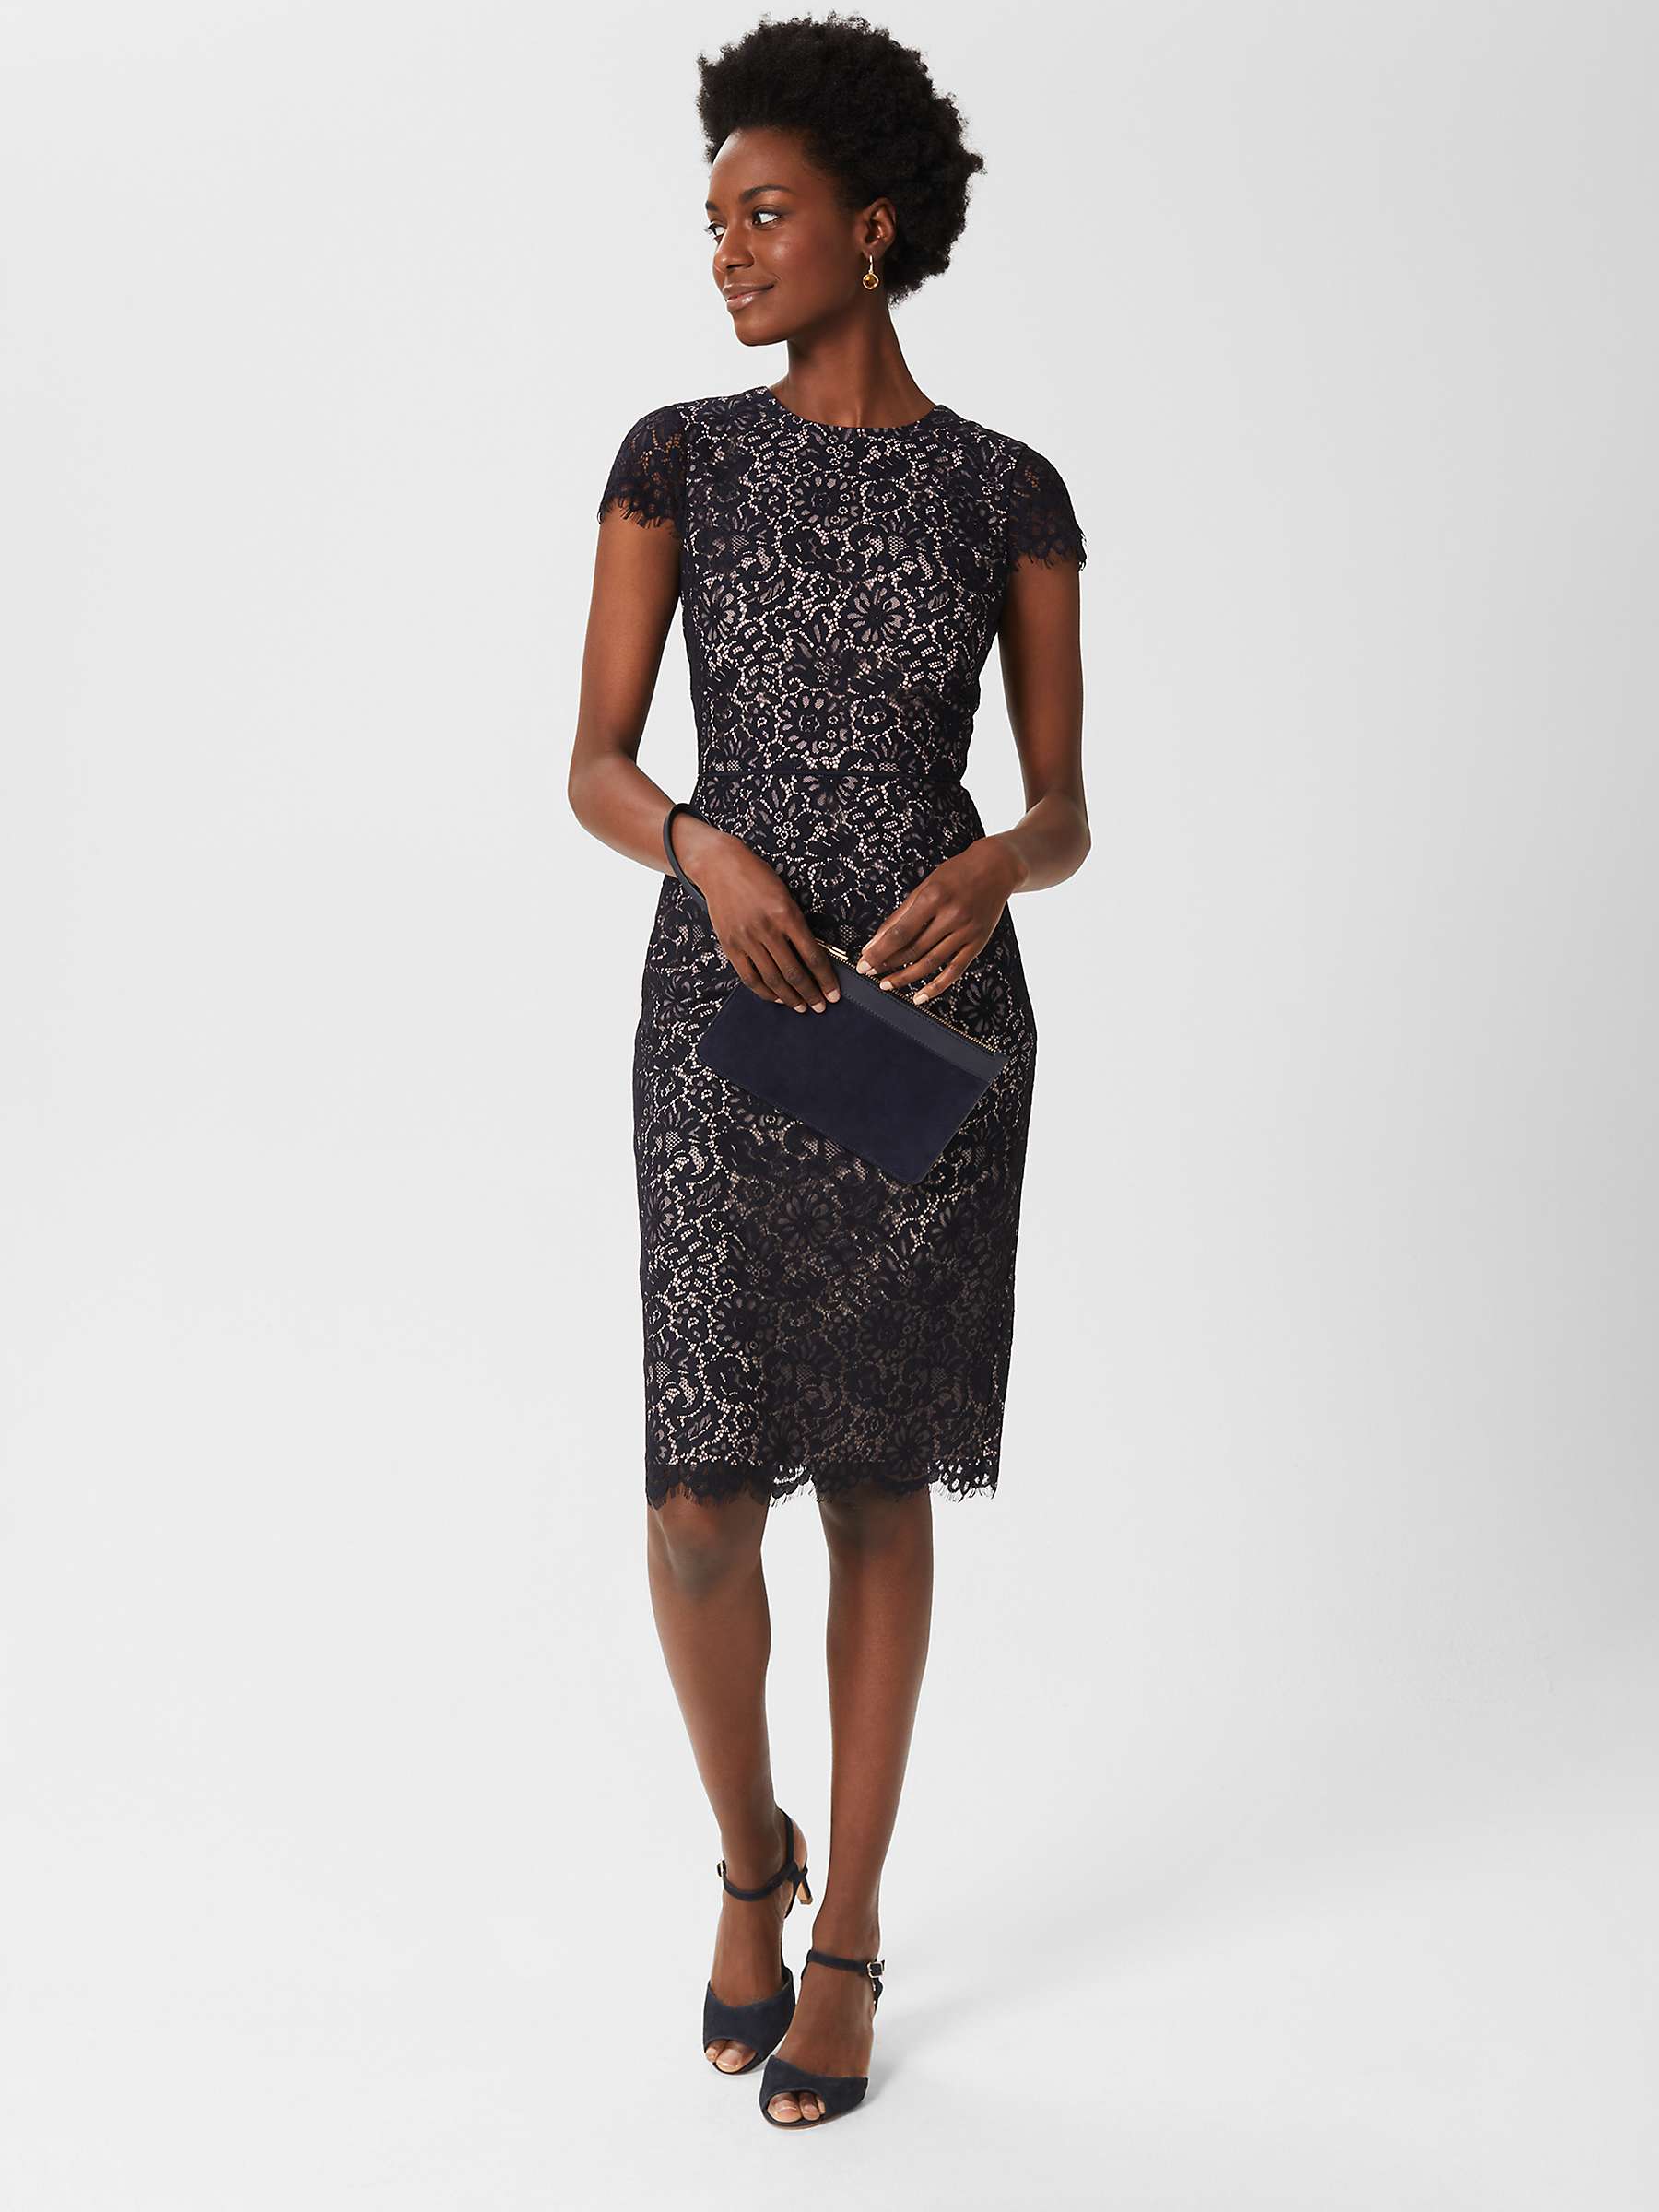 Buy Hobbs Anastasia Lace Shift Dress, Navy/Oyster Online at johnlewis.com